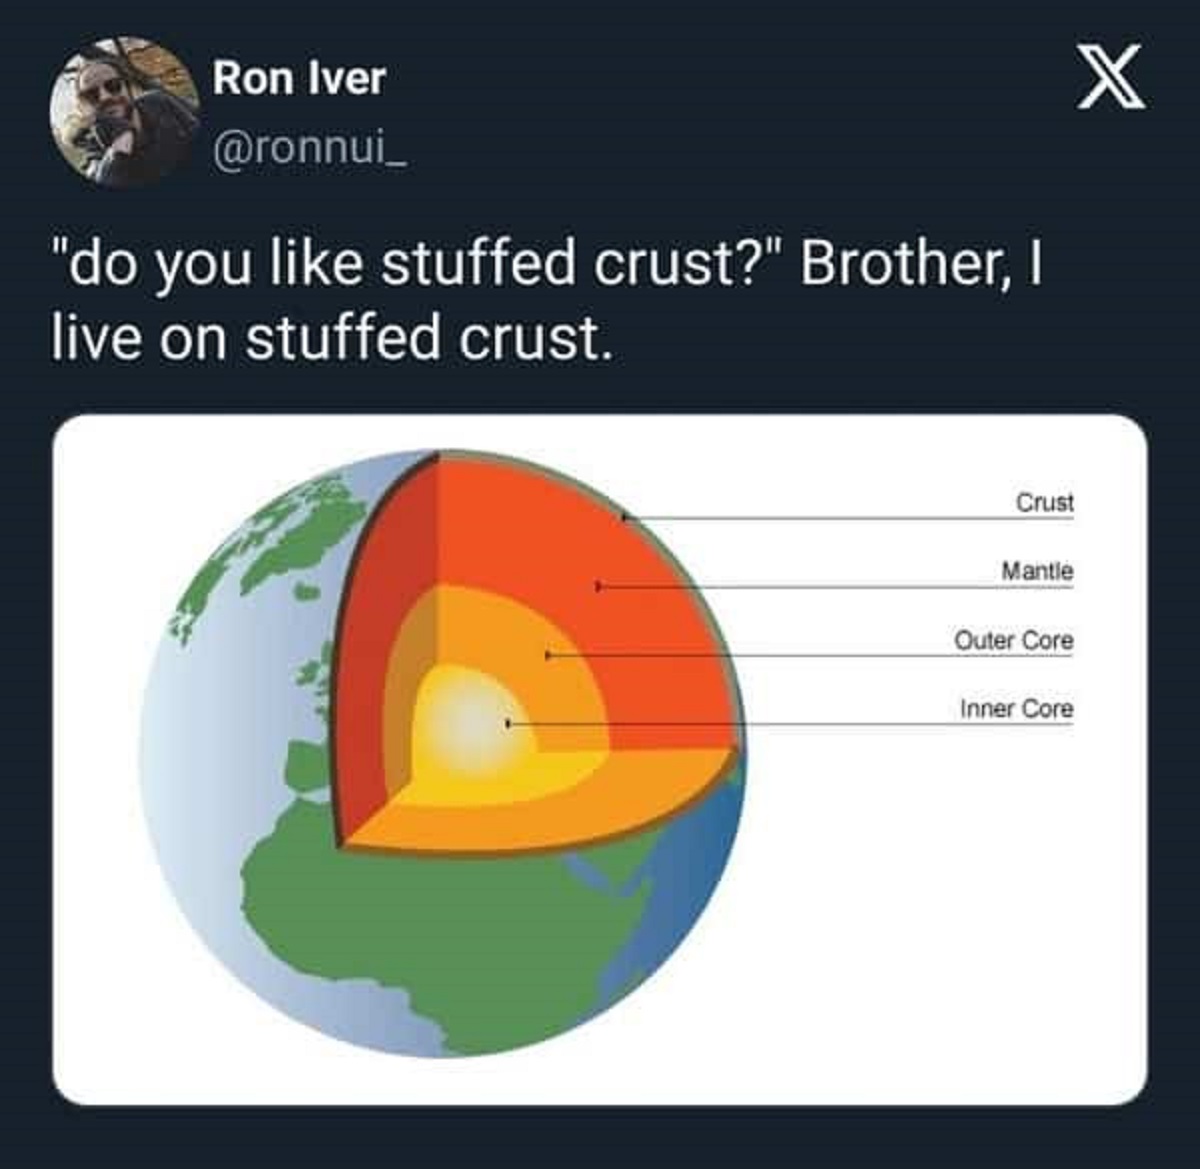 inner structure of earth - Ron Iver "do you stuffed crust?" Brother, I live on stuffed crust. Crust Mantle Outer Core Inner Core X